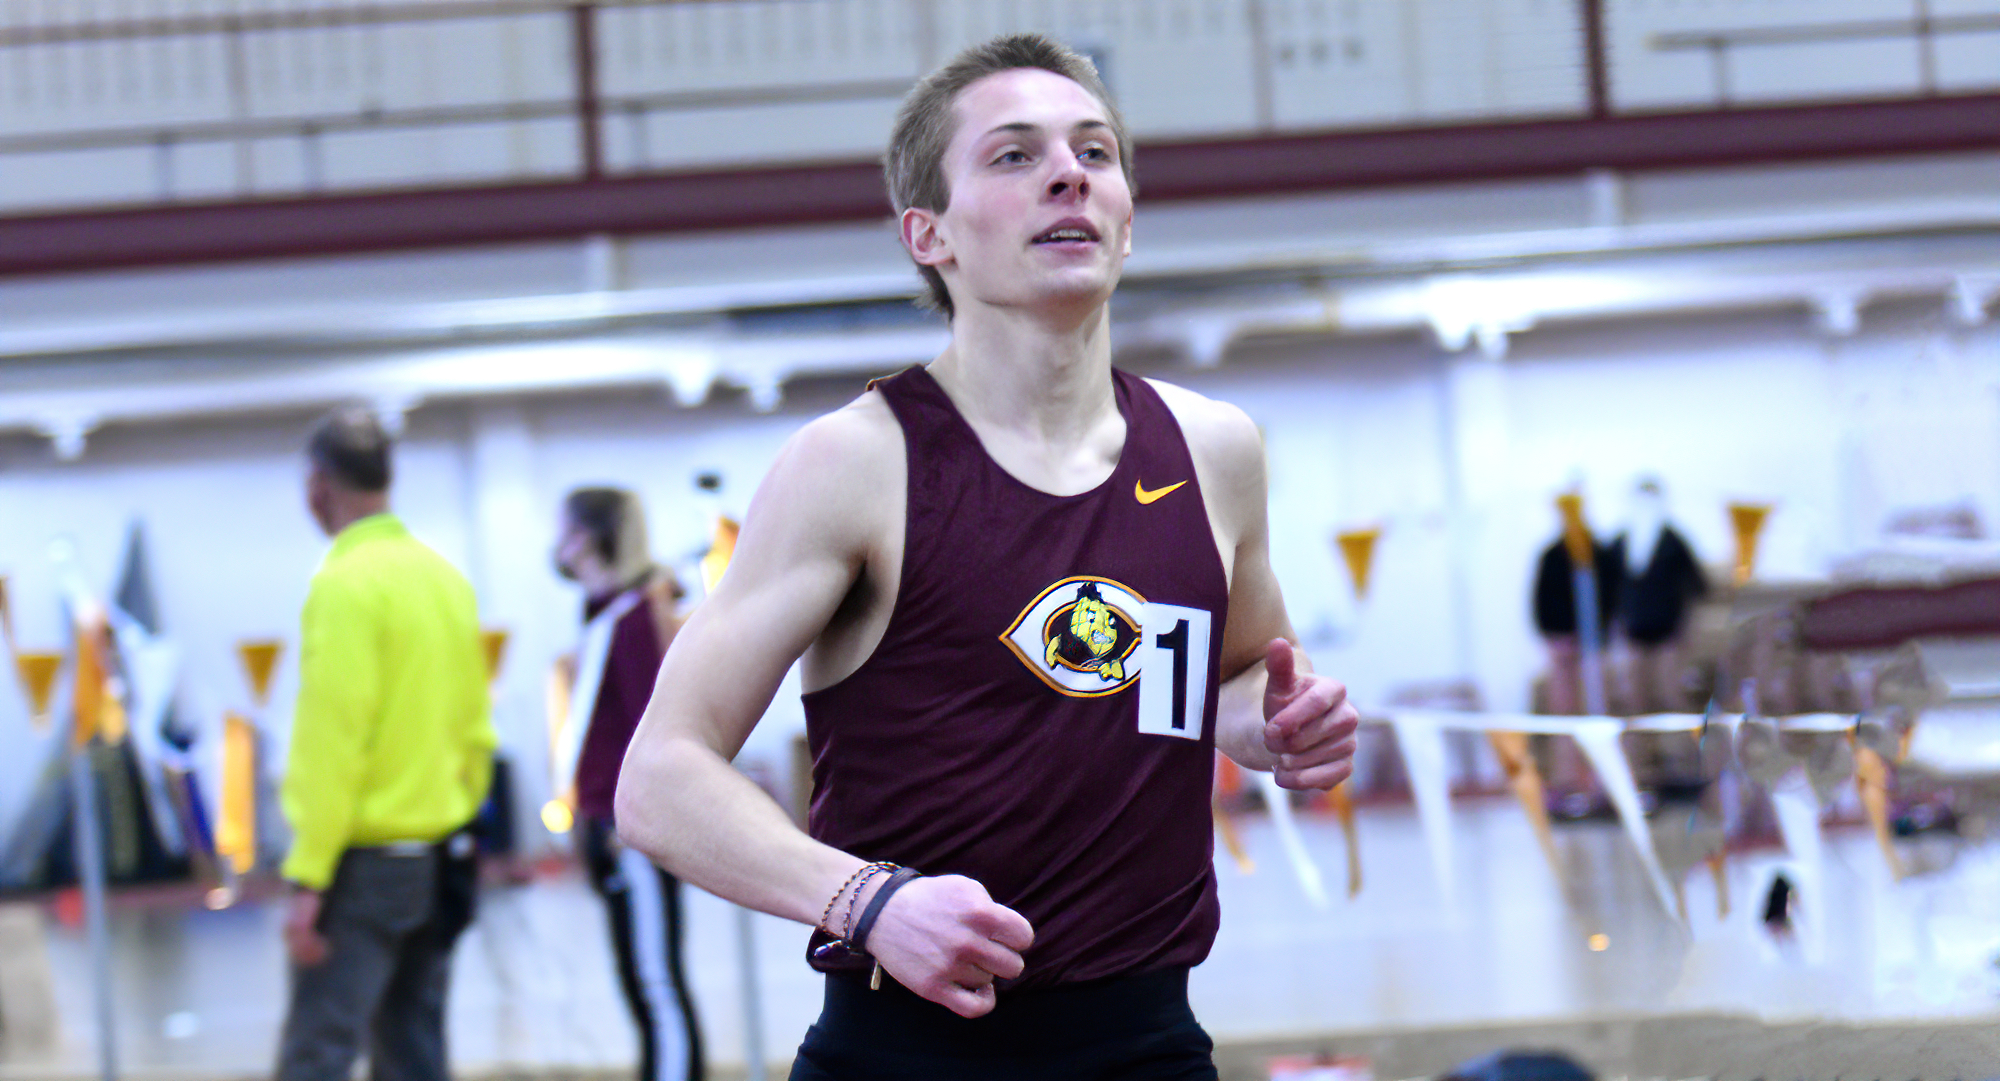 Junior Jesse Middendorf broke the 33-year-old school record  in the 800 meters at the Ron Masanz Classic. It is also the fifth fastest in DIII this year.